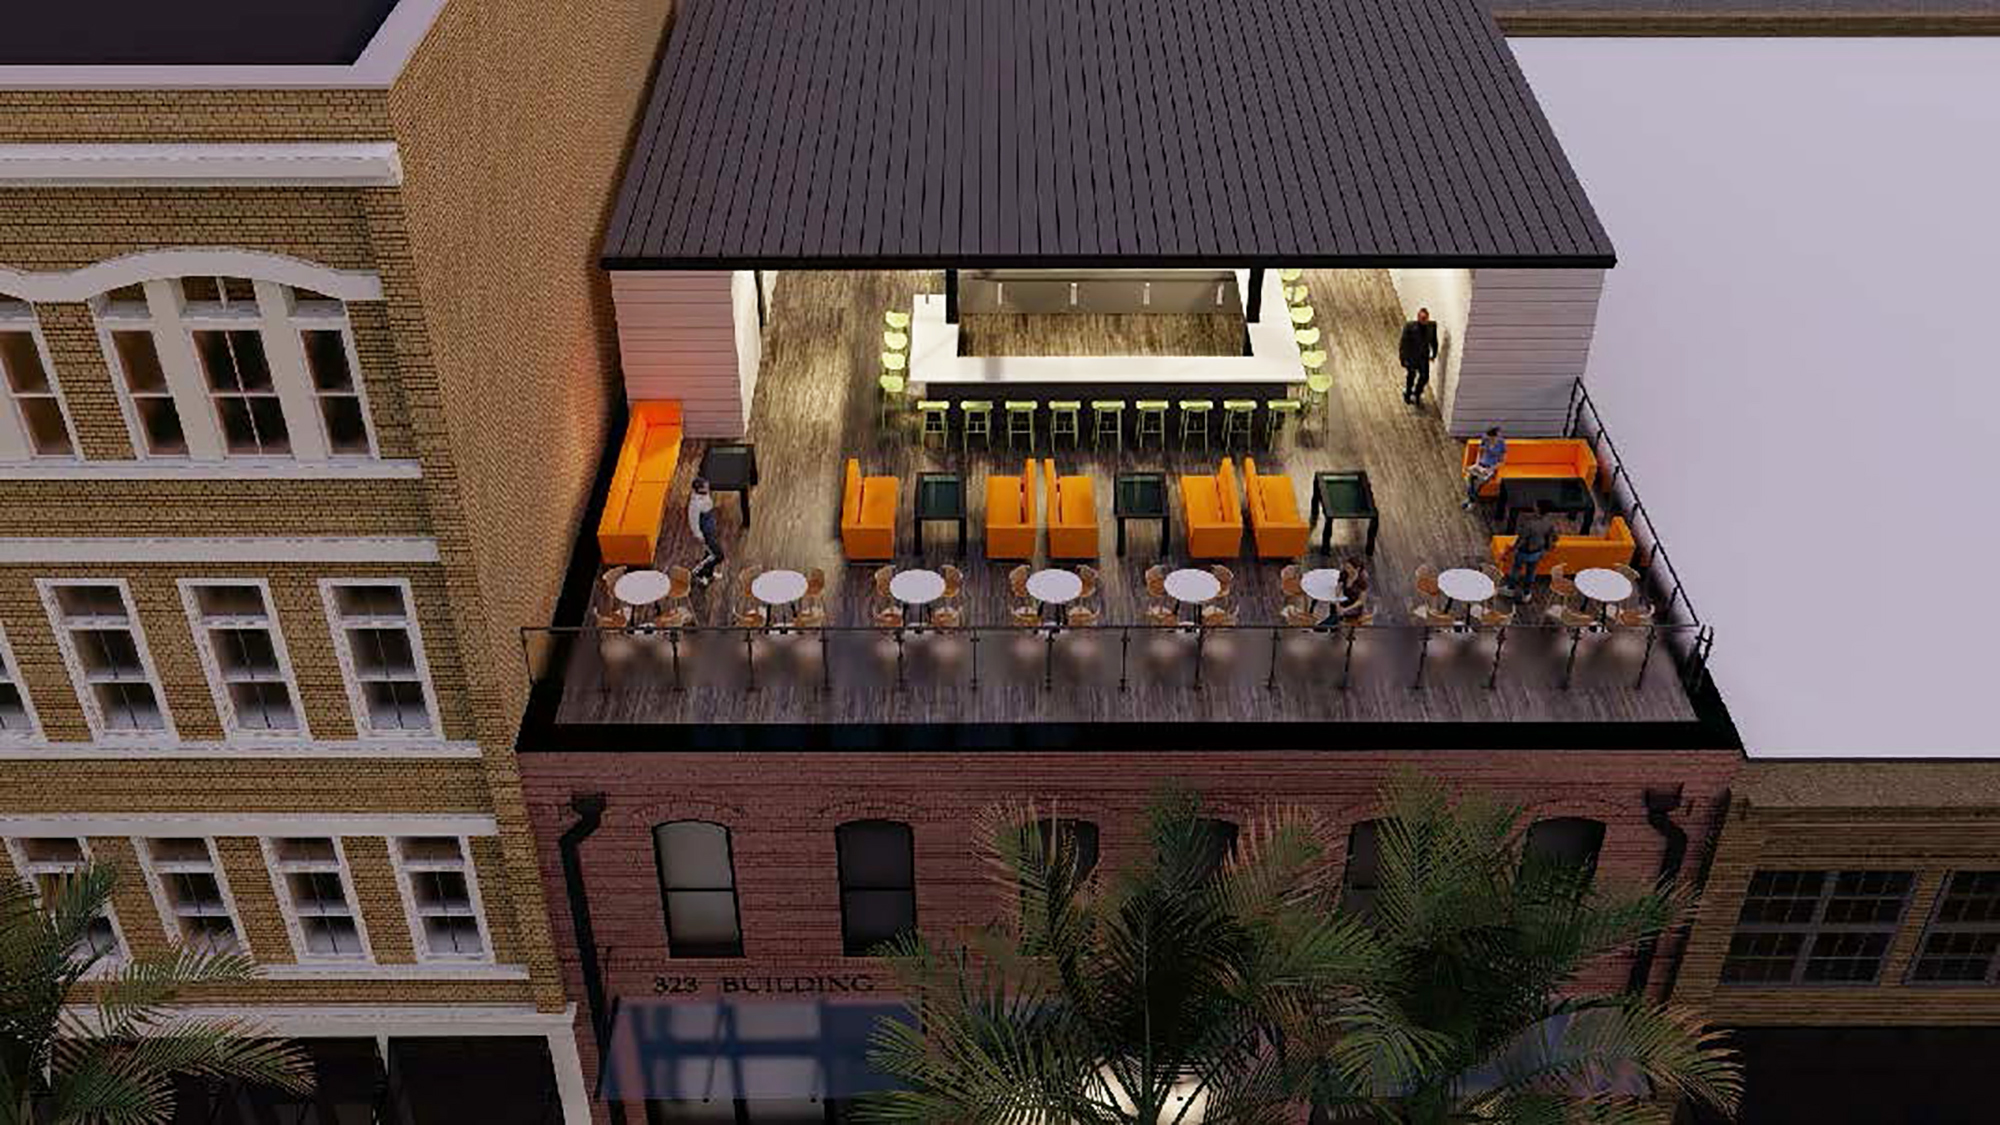 Plans for the venue include a 2,250-square-foot covered and open-air rooftop bar.